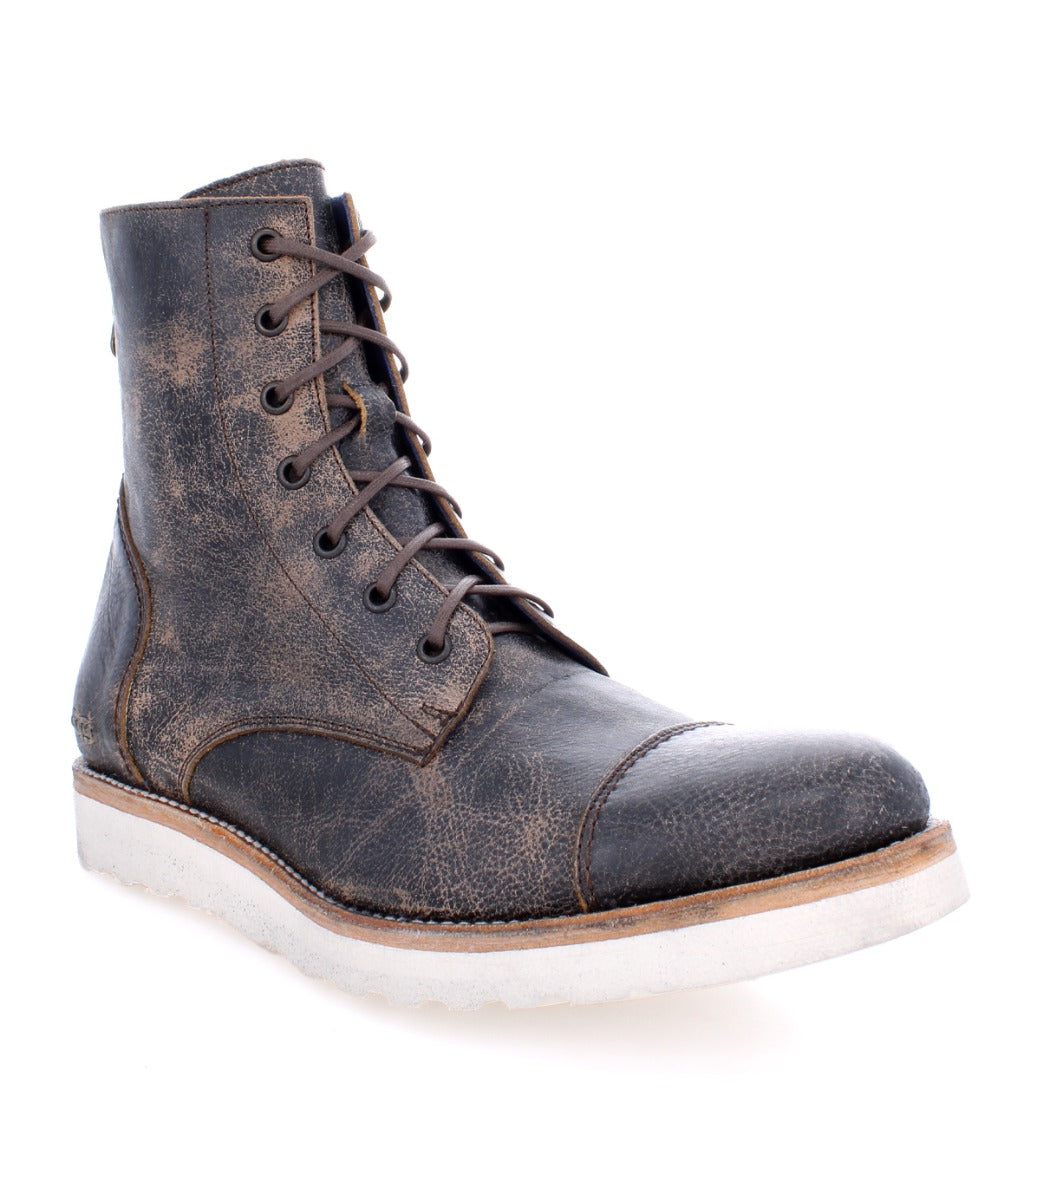 A single Protege Light men's lace-up boot with a weathered texture and a white rubber sole, isolated on a white background by Bed Stu.